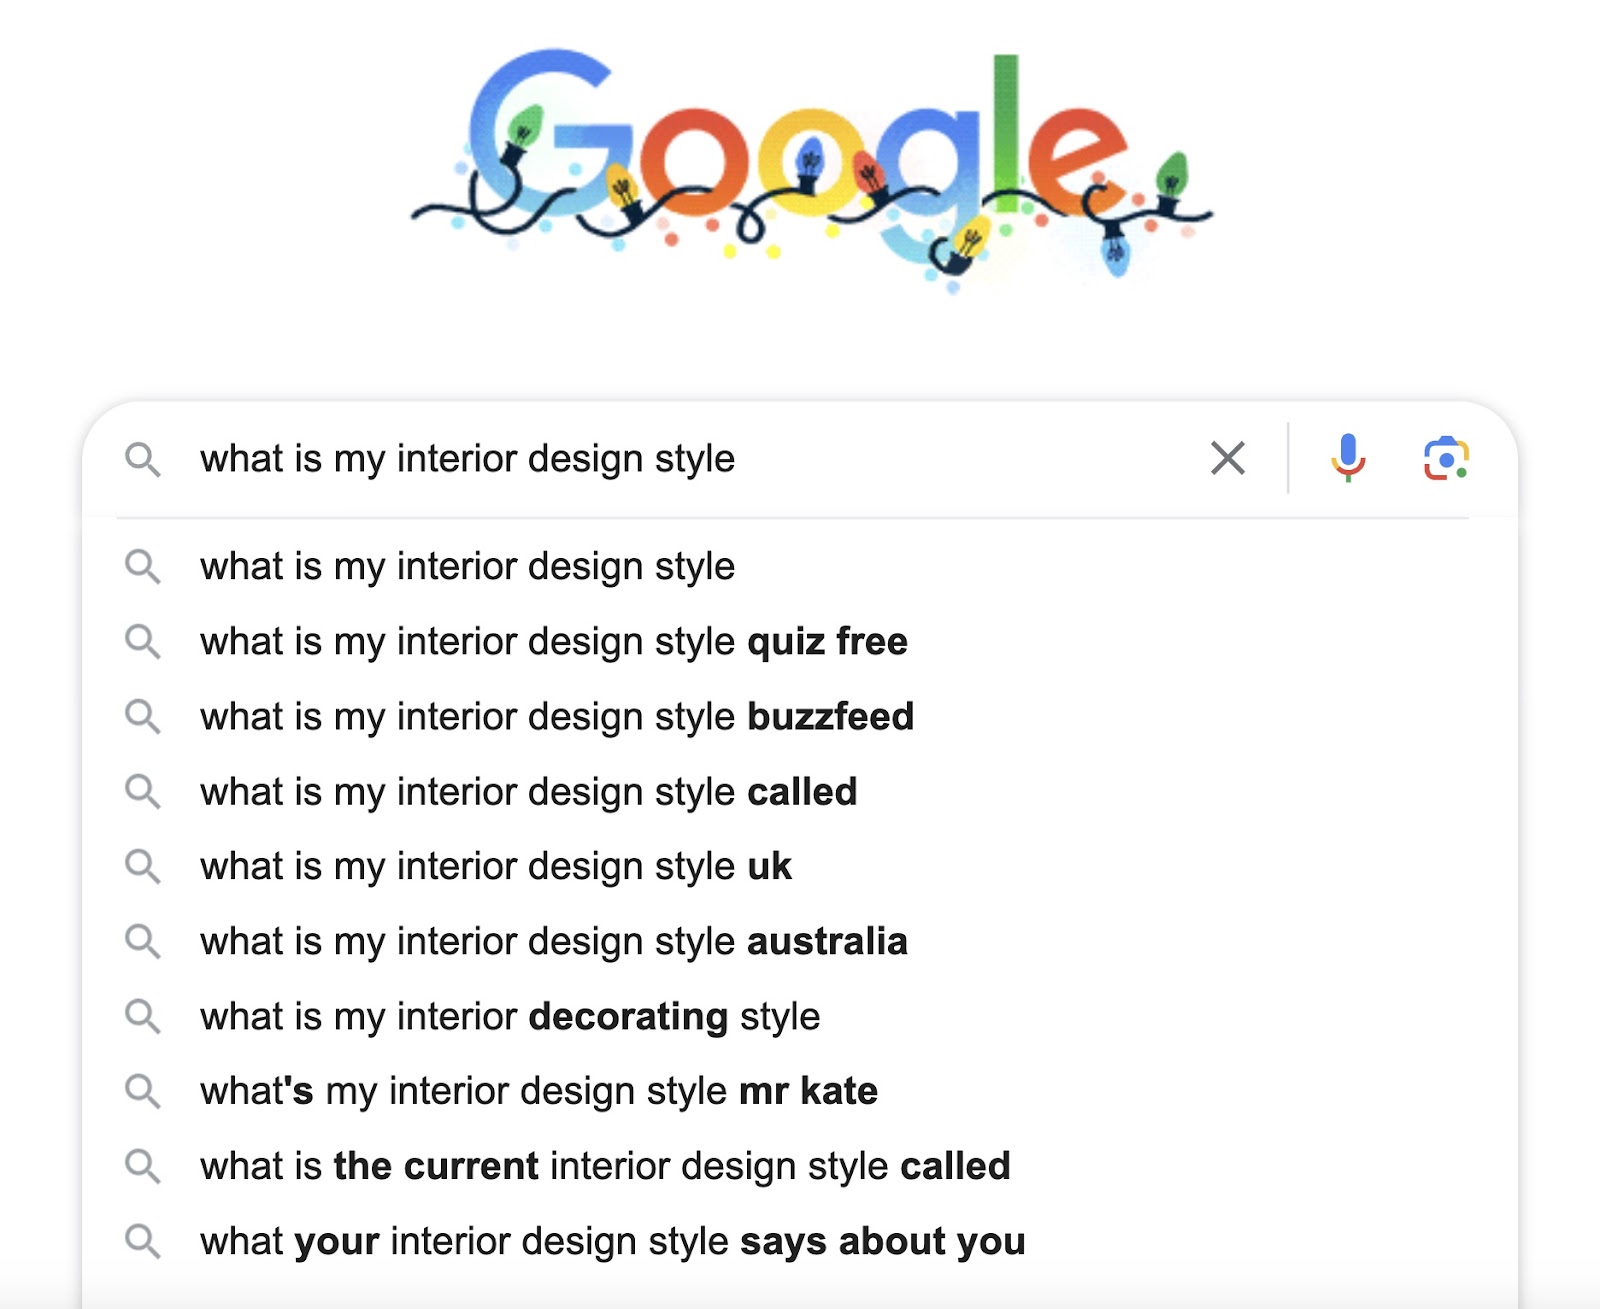 Google’s autocomplete suggestions when typing "what is my interior design style" into the search bar